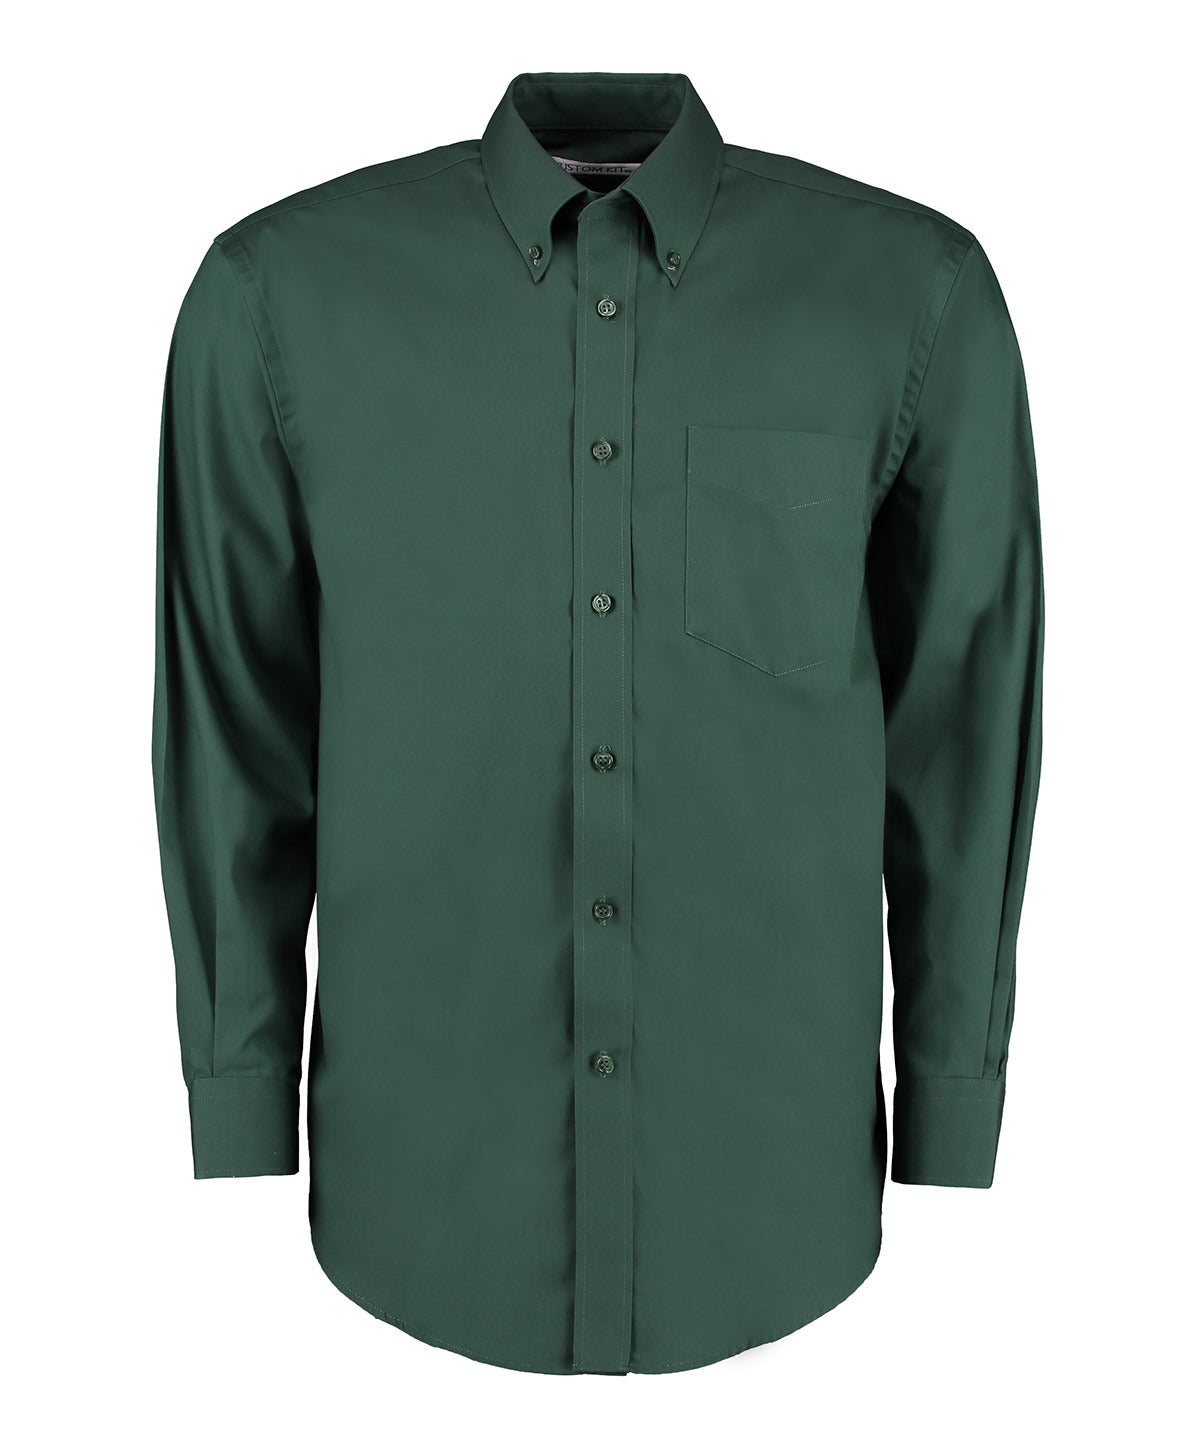 Bolir - Corporate Oxford Shirt Long-sleeved (classic Fit)